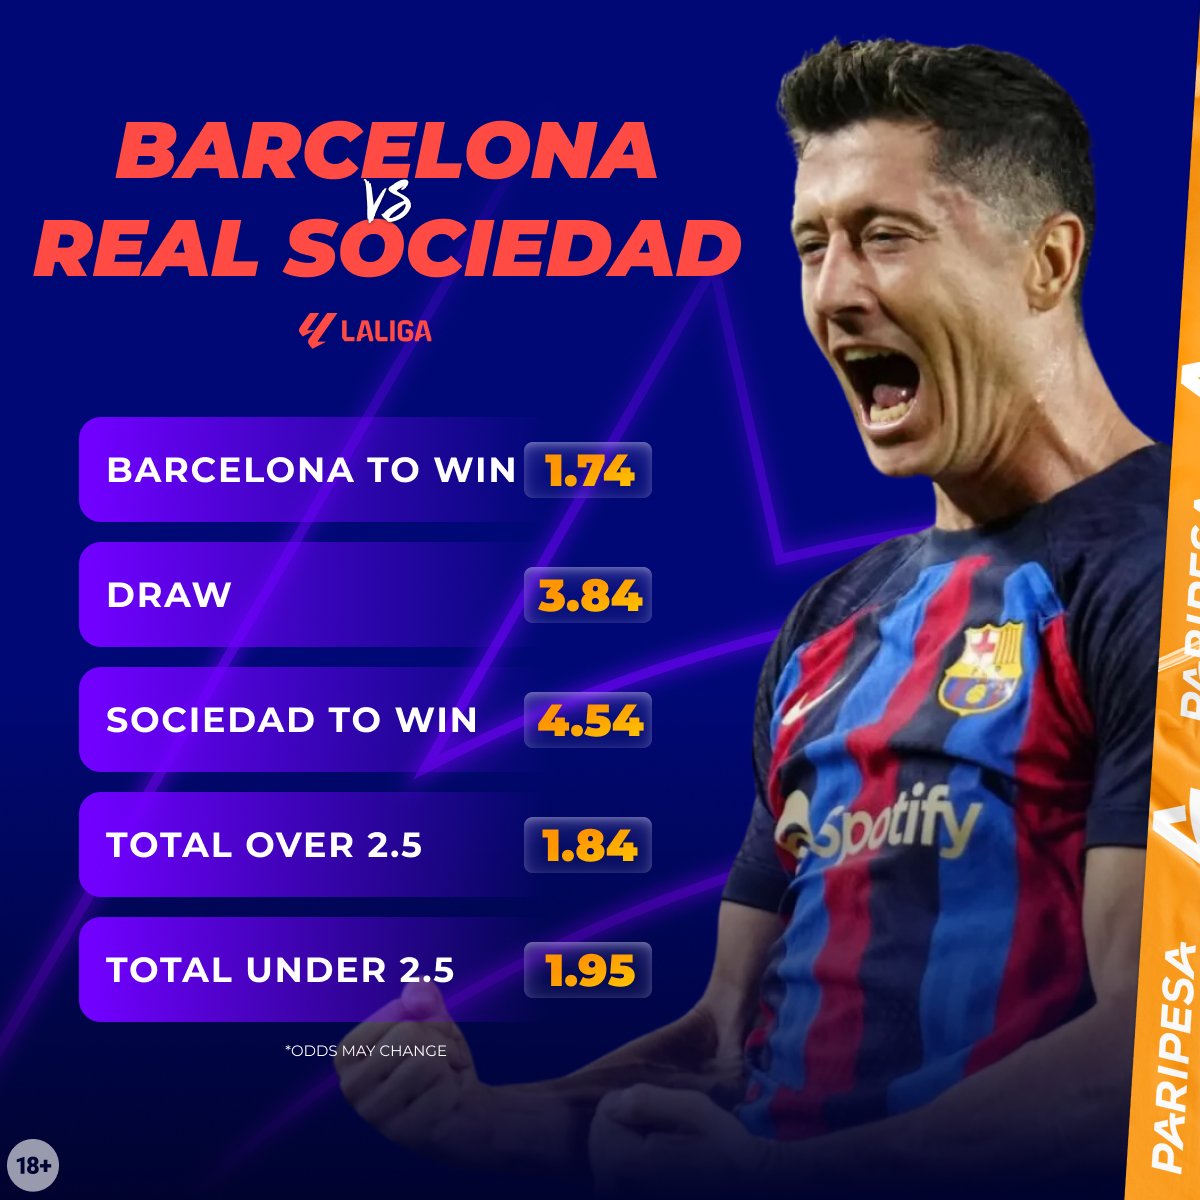 💯 Barcelona is trying to catch up with Girona. Need a win 💯 But Sociedad is not going to give up either! 💯 Get the best odds for a La Liga match! #laliga